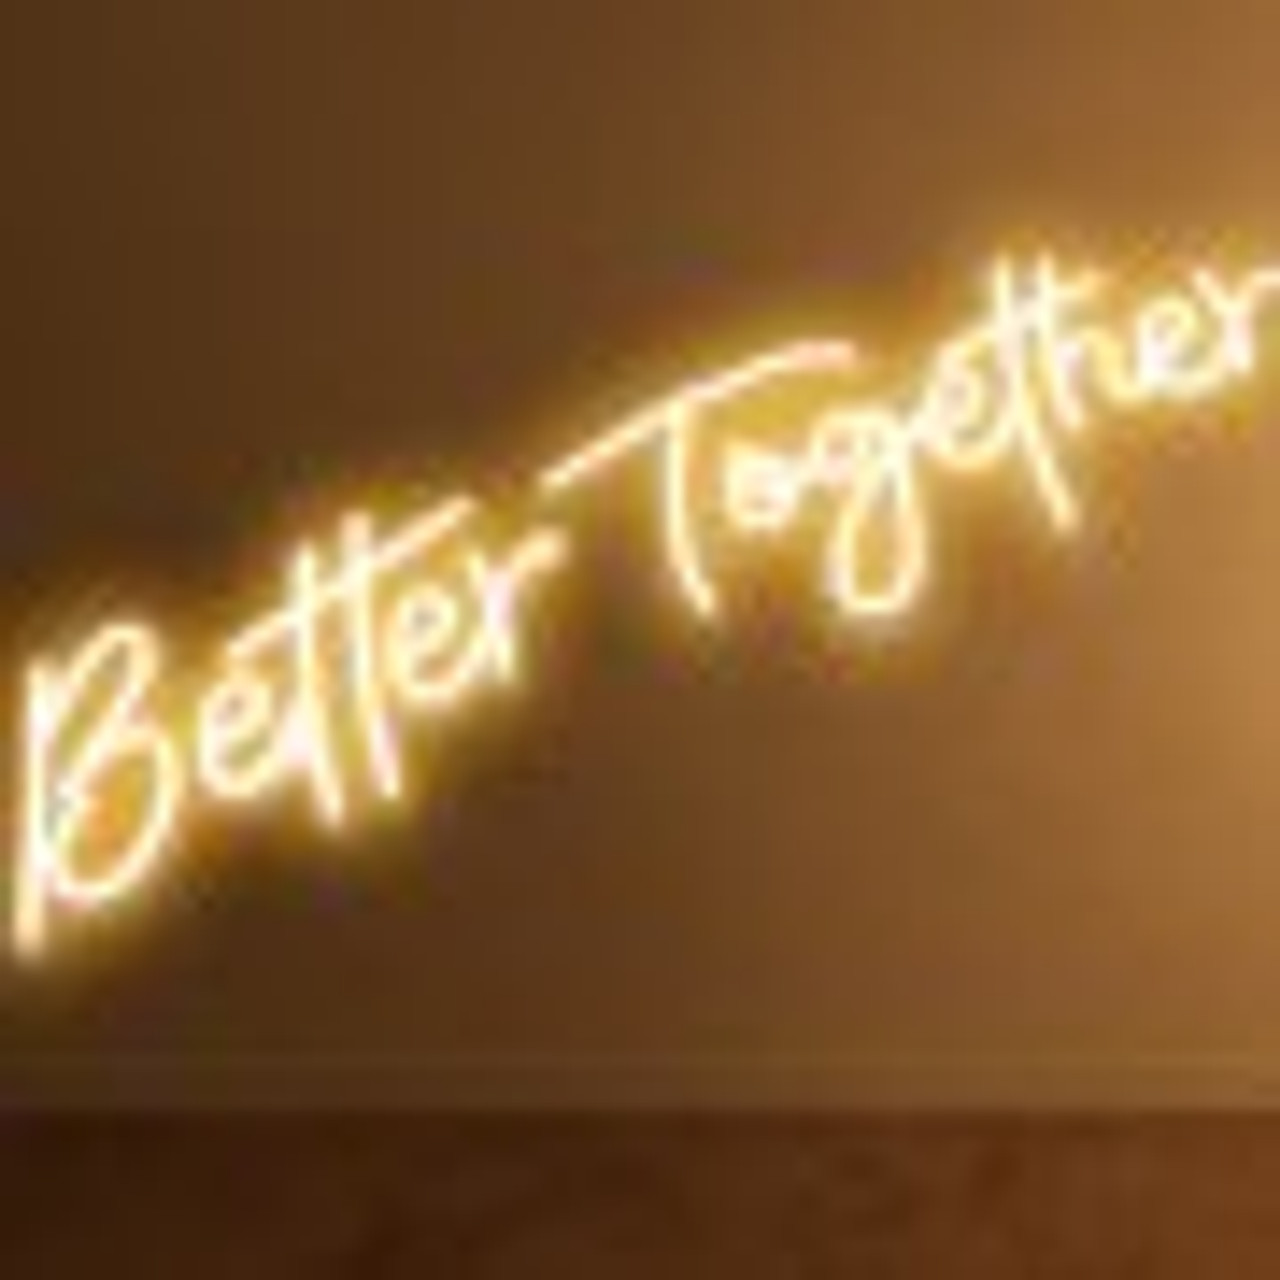 Better Together Neon Sign, 13" x 7" +18" x 8" Warm White LED lights Sign, Adjustable Brightness with Remote Control, Used for Home, Party, Wedding, and Bar Decoration (Power Adapter Included)